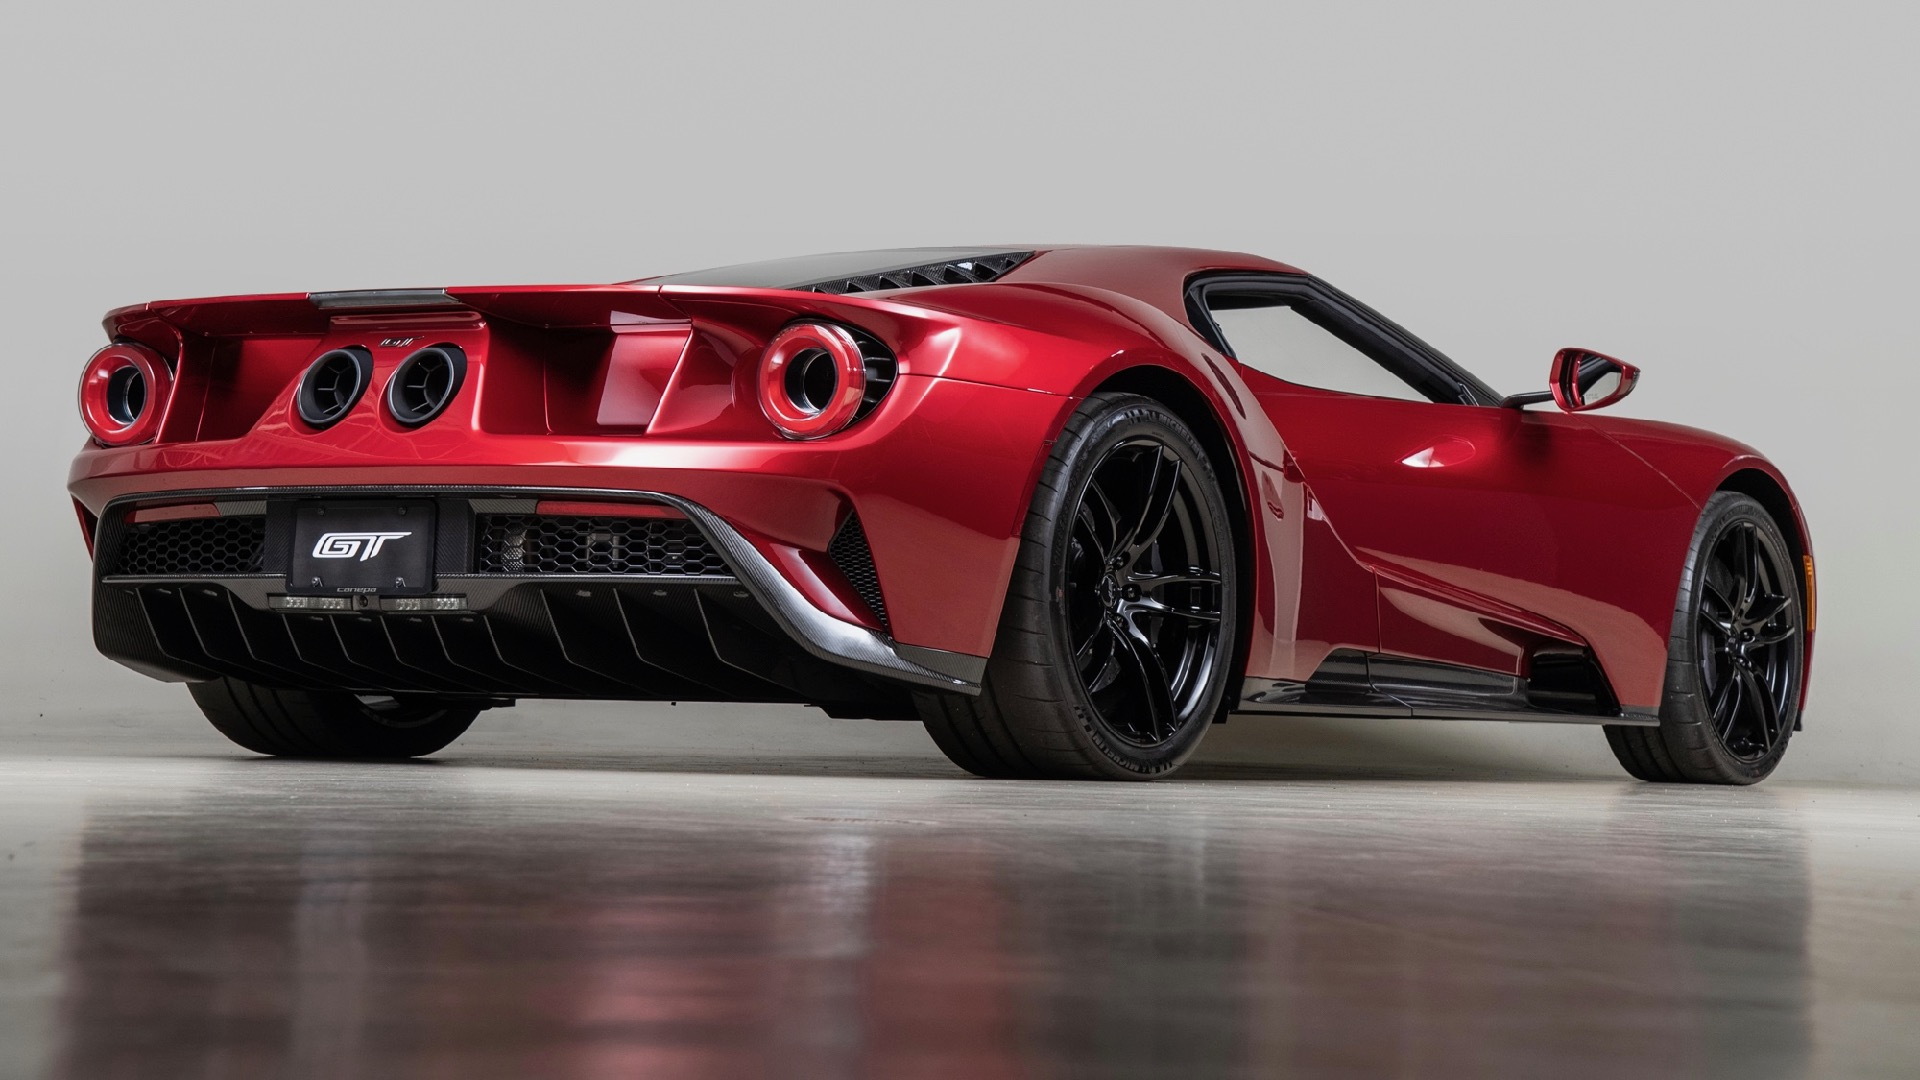 2017 Ford GT owned by Moray Callum (photo by Canepa)